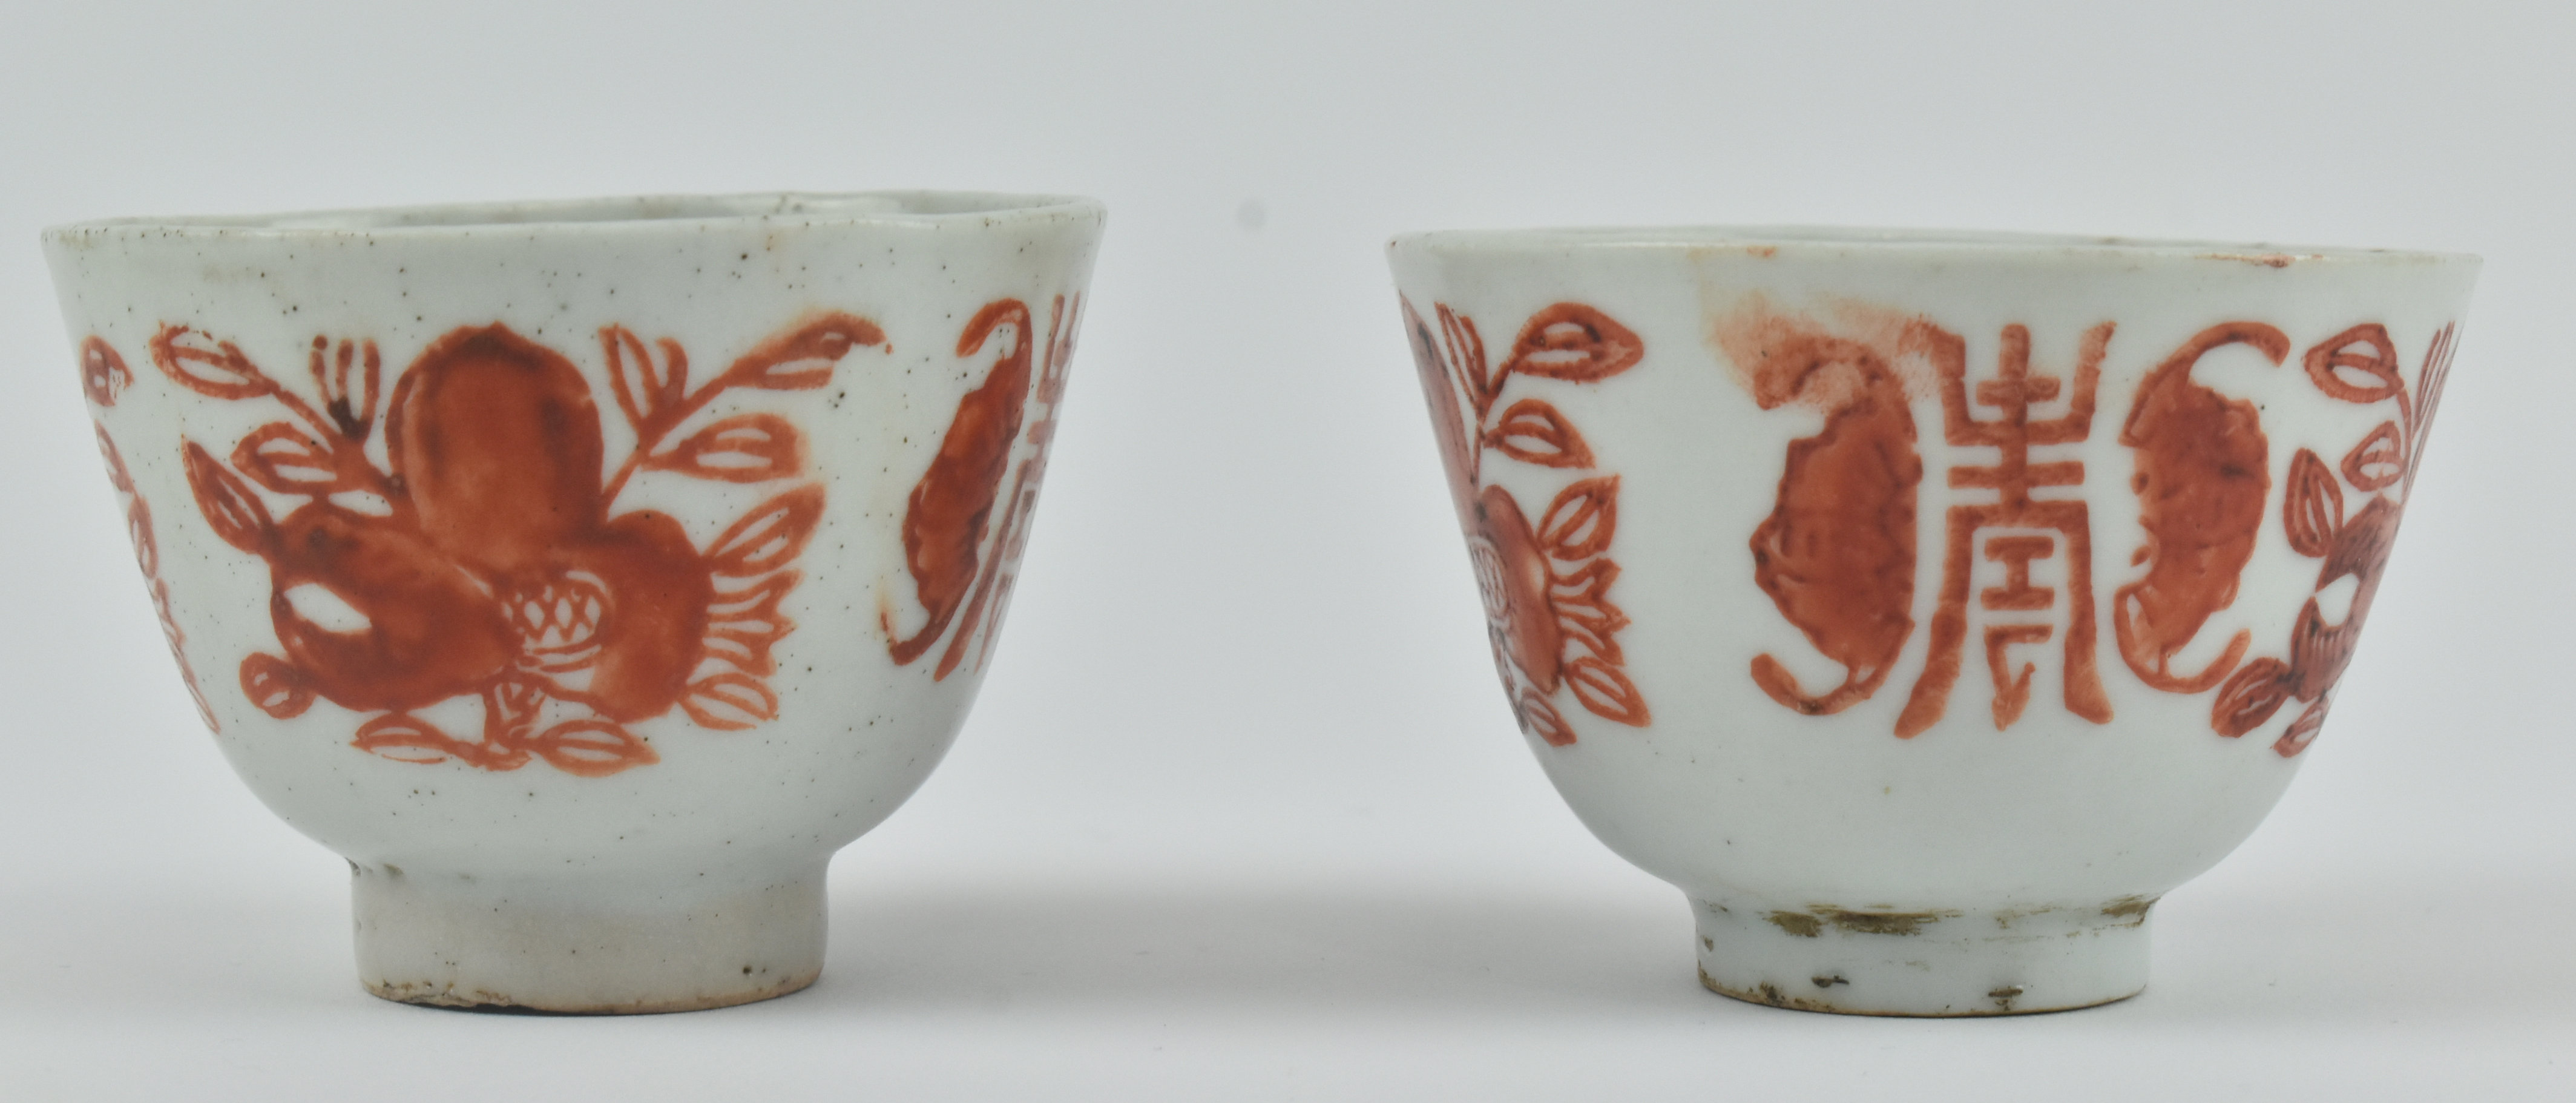 GROUP OF 4 GUANGXU "SAN DUO" CUPS AND PLATES 光绪 “三多”茶杯盘子 - Image 6 of 8